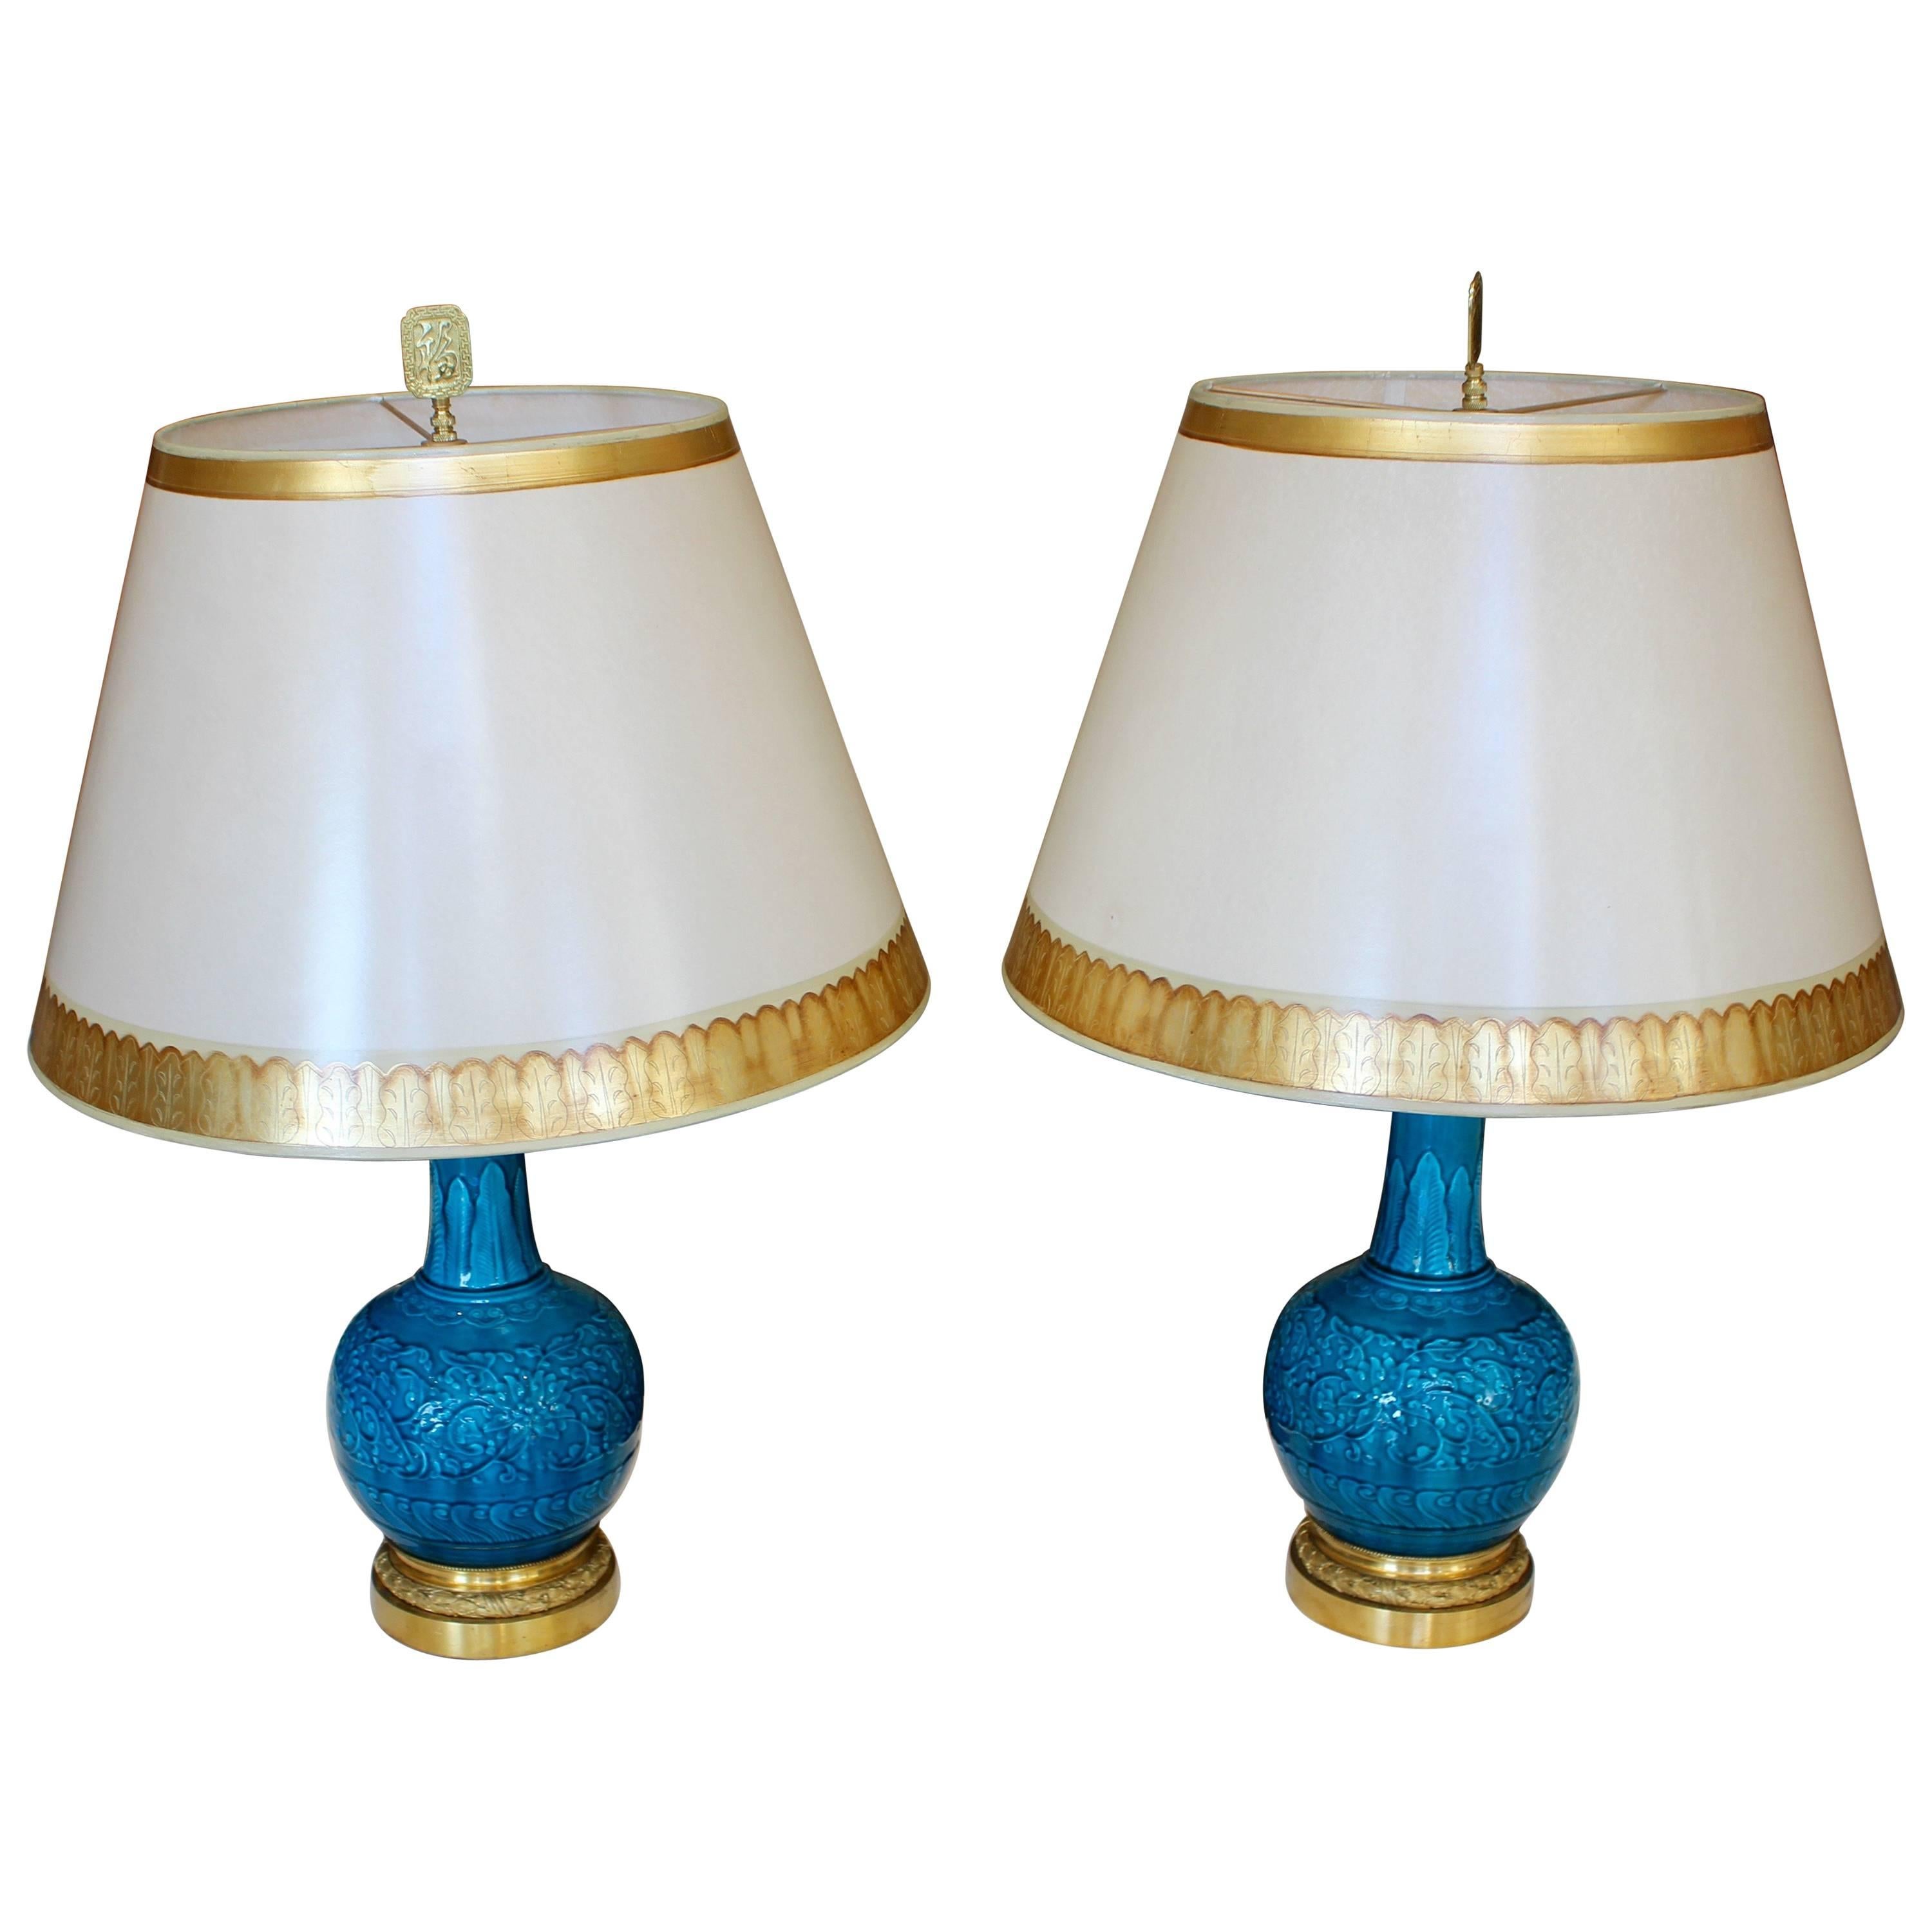 Pair of Ormolu-Mounted Theodore Deck Faience Persian-Blue Vases with Lampshades